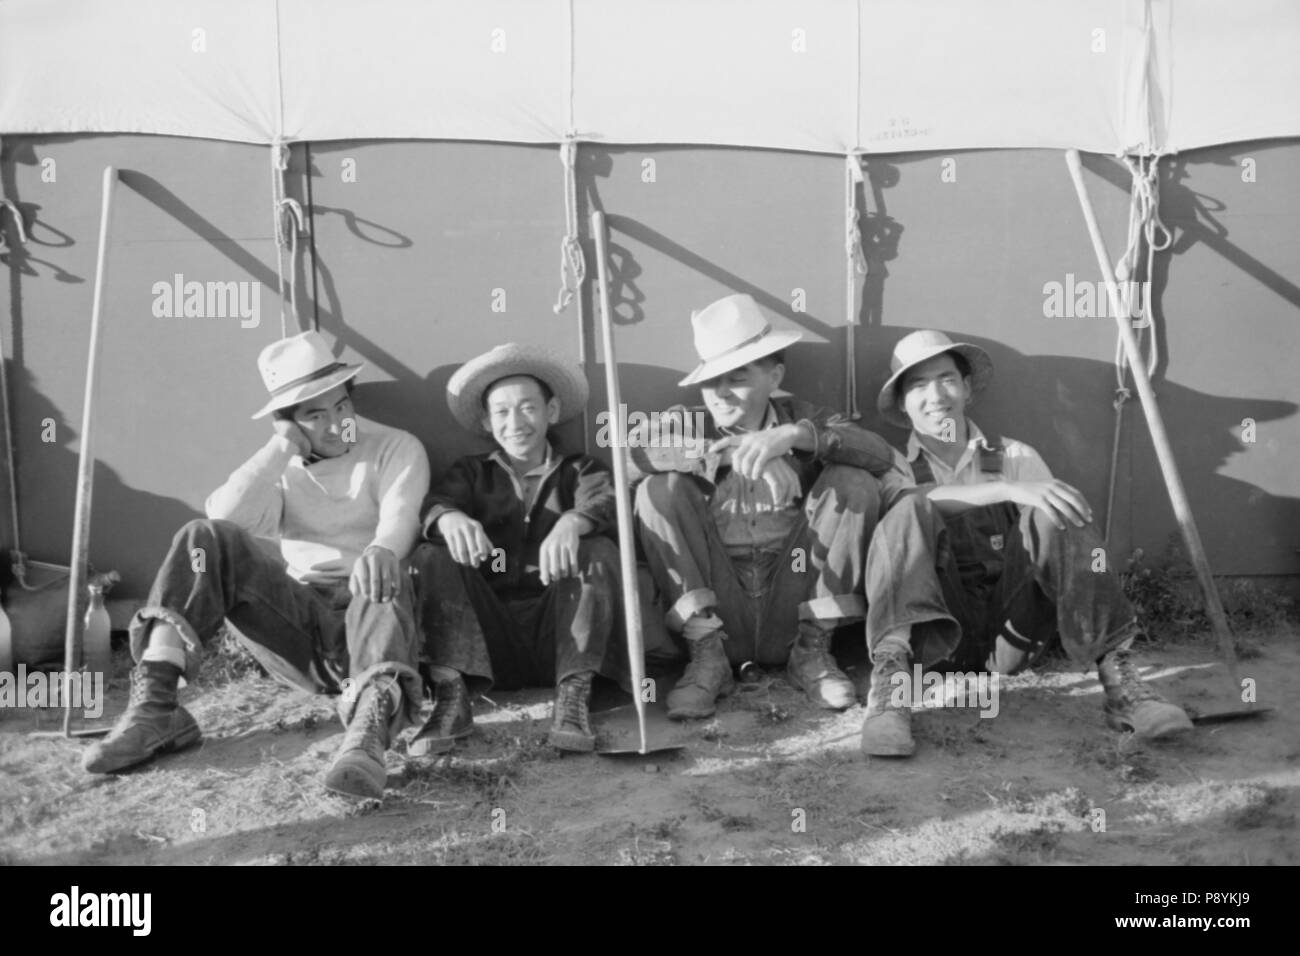 Japanese-American Farm Workers outside their Tent, Farm Security Administration (FSA) Mobile Camp, Nyssa, Oregon, USA, Russell Lee, Farm Security Administration, July 1942 Stock Photo